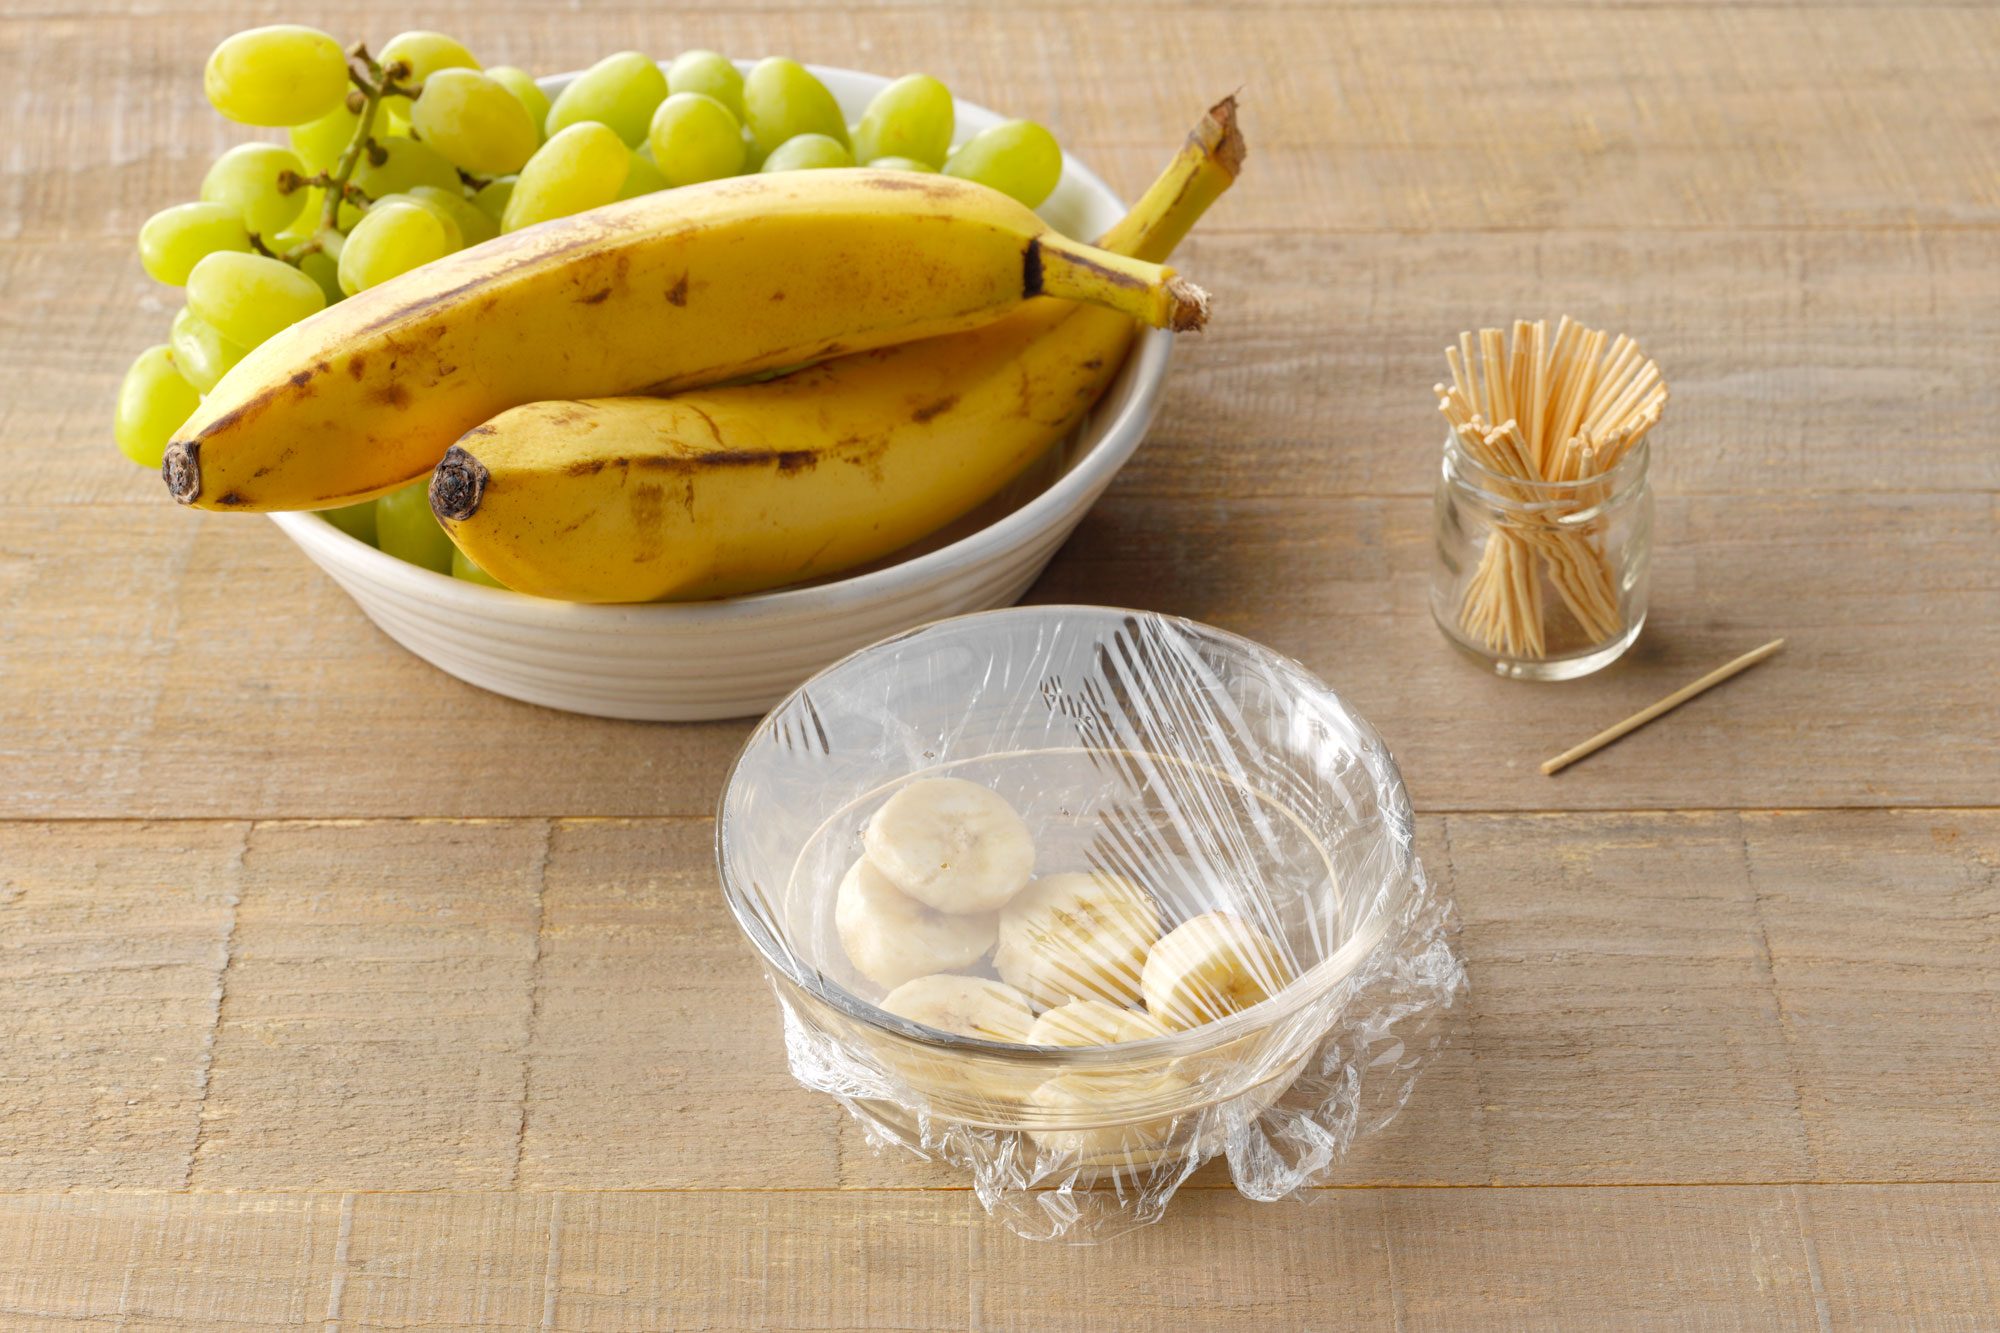 rotten fruit trap method. bowl of rotten banana slices in a bowl covered with plastic wrap that has had toothpick holes poked into it. wood surface background with bananas and grapes nearby.